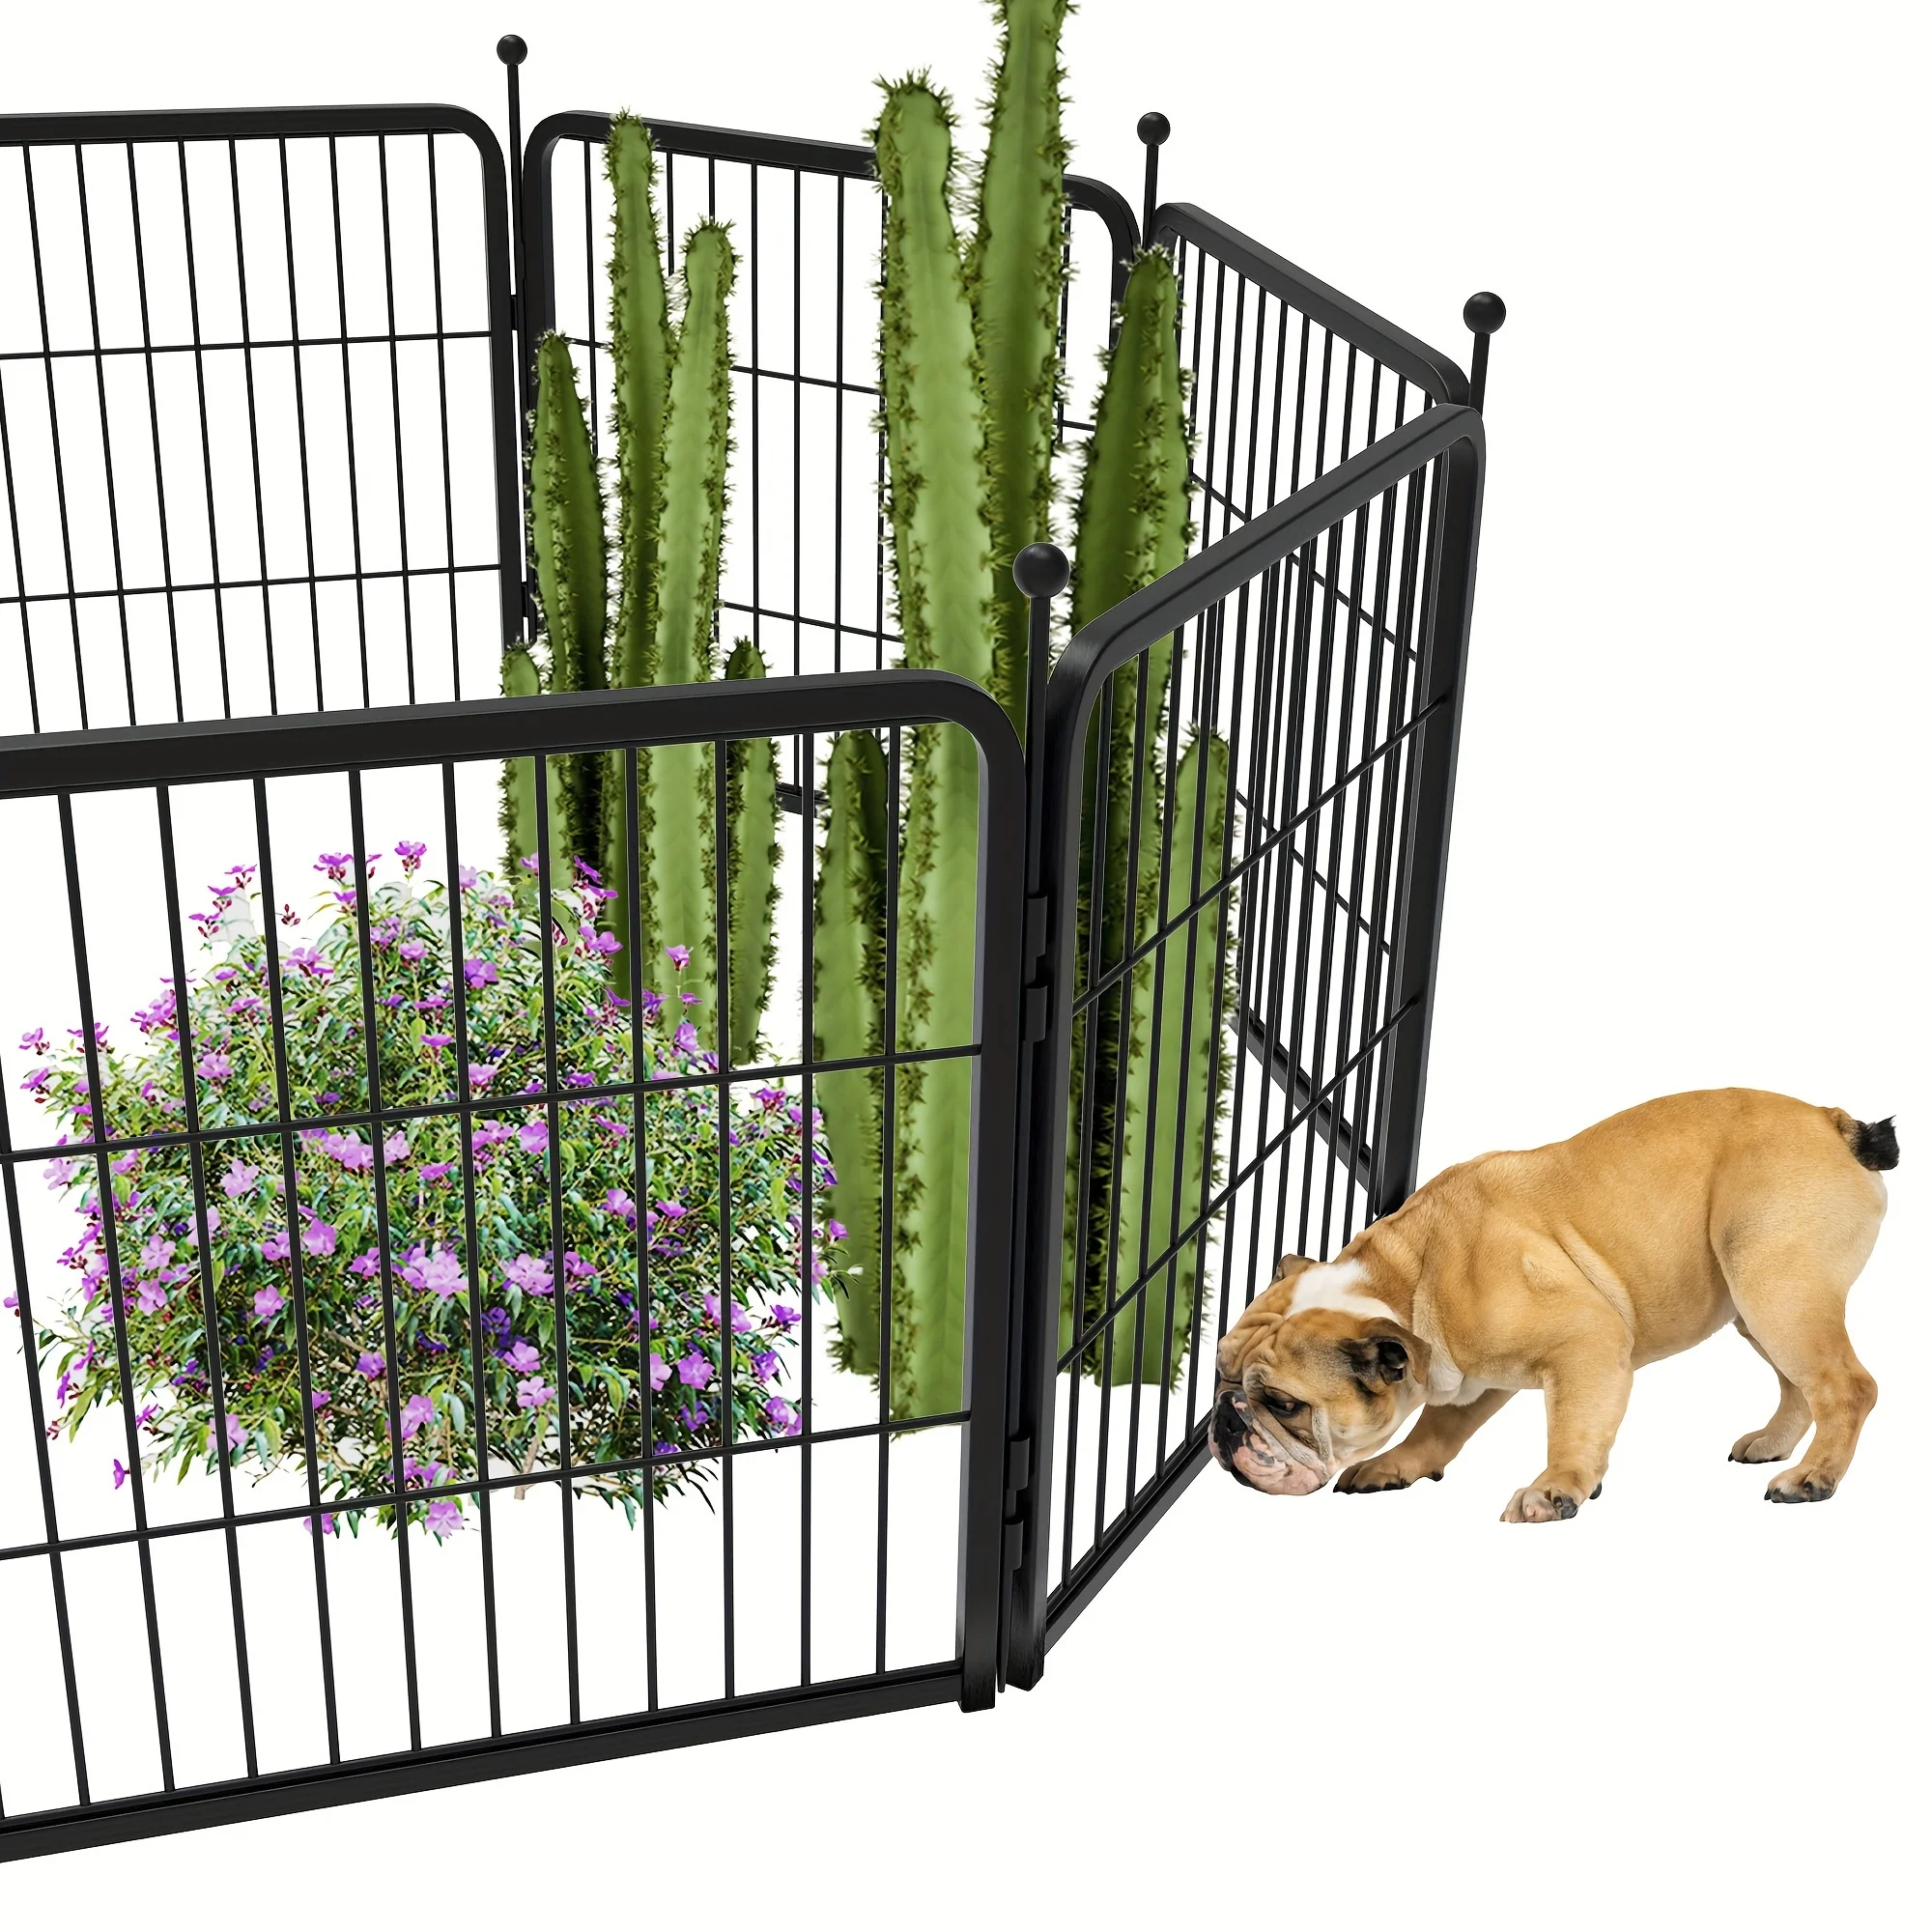 

8pcs Panels Decorative Garden Fence Panels With Gate, Dog Fence For The Yard, Heavy Duty Metal, 24inch High 14.82ft Long In Tot